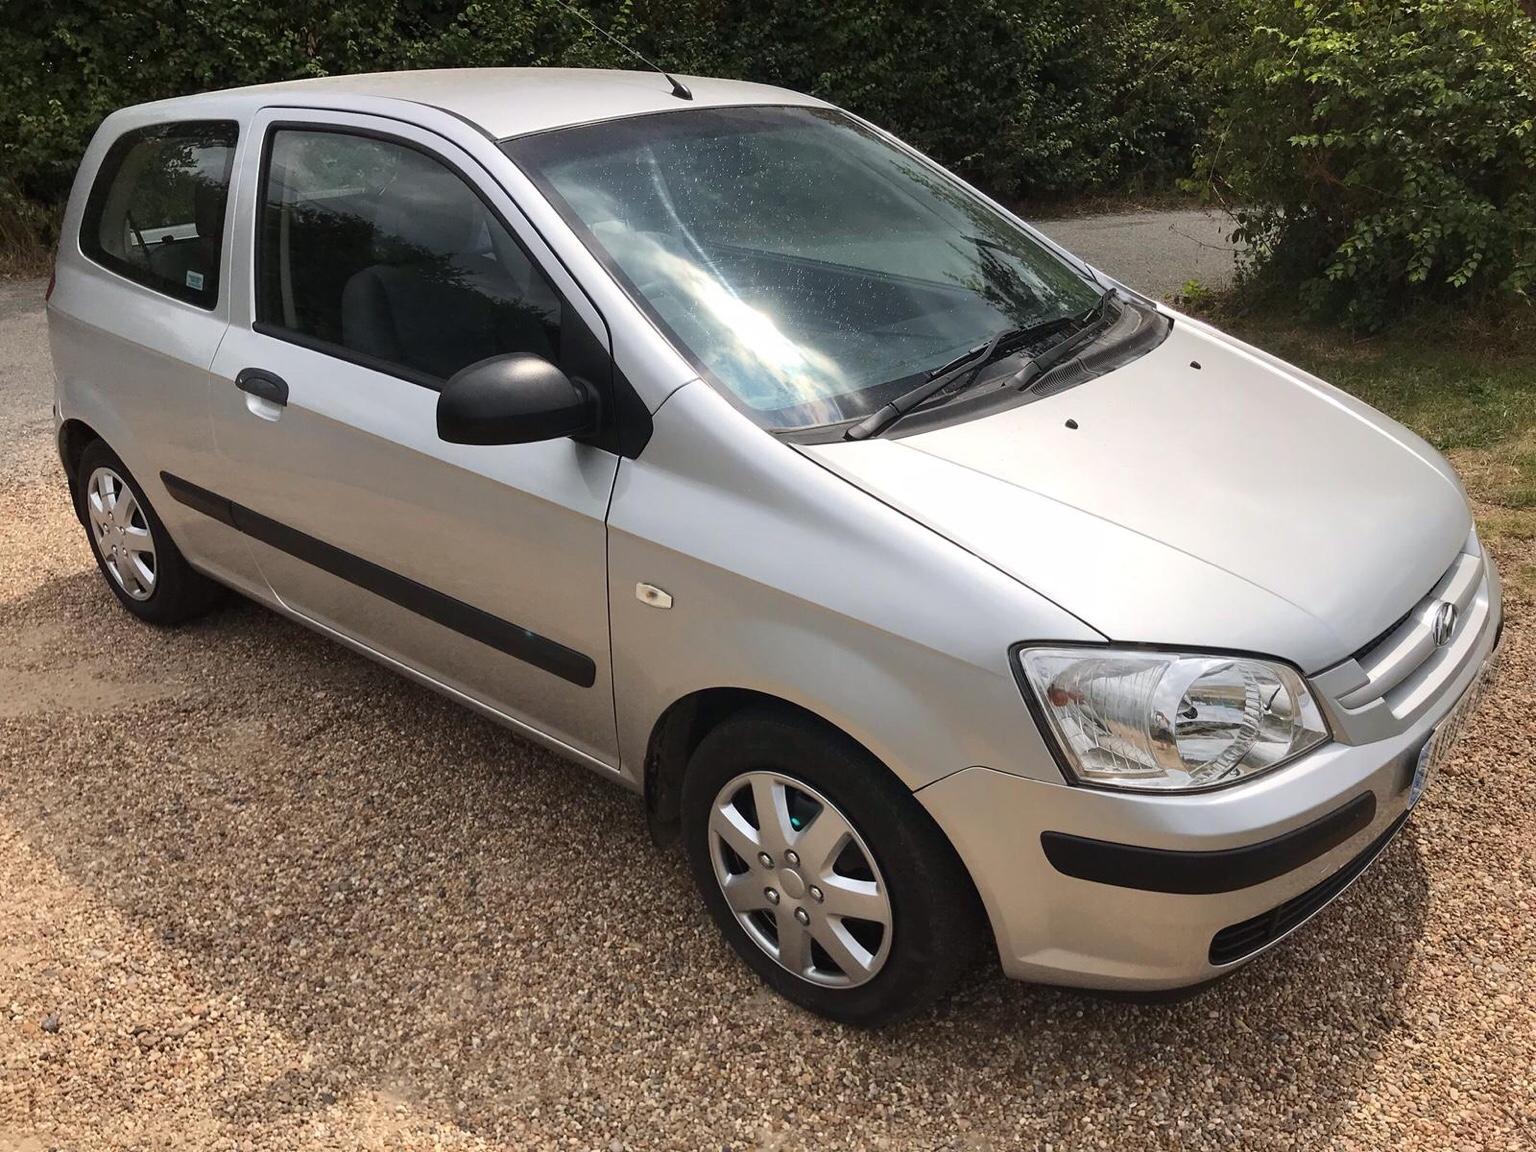 2004 Hyundai Getz in CO7 Tendring for £995.00 for sale